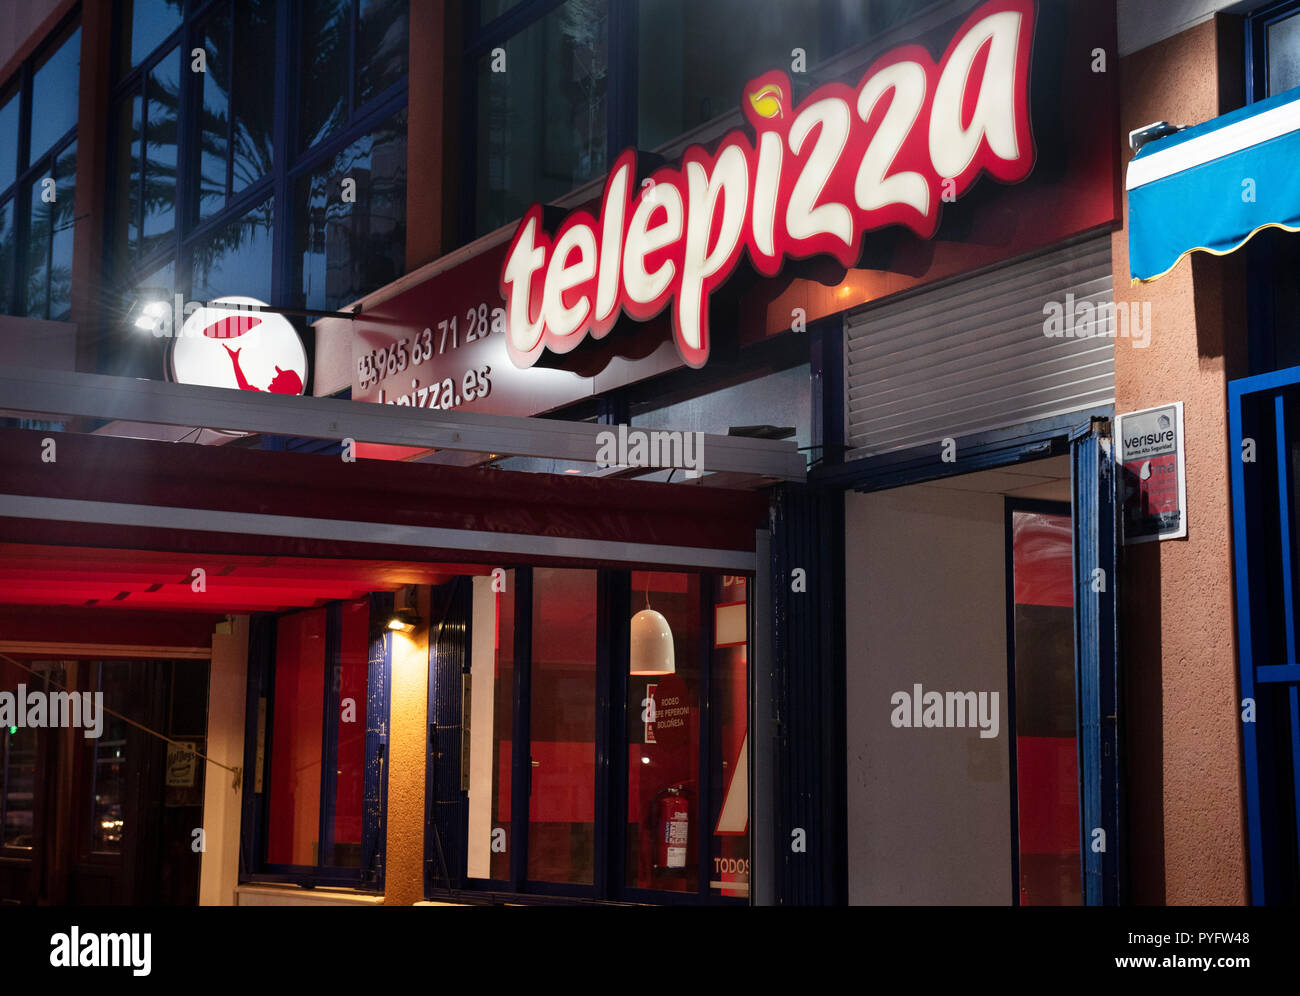 Spanish fast-food restaurant branch of Telepizza seen in Spain. Stock Photo